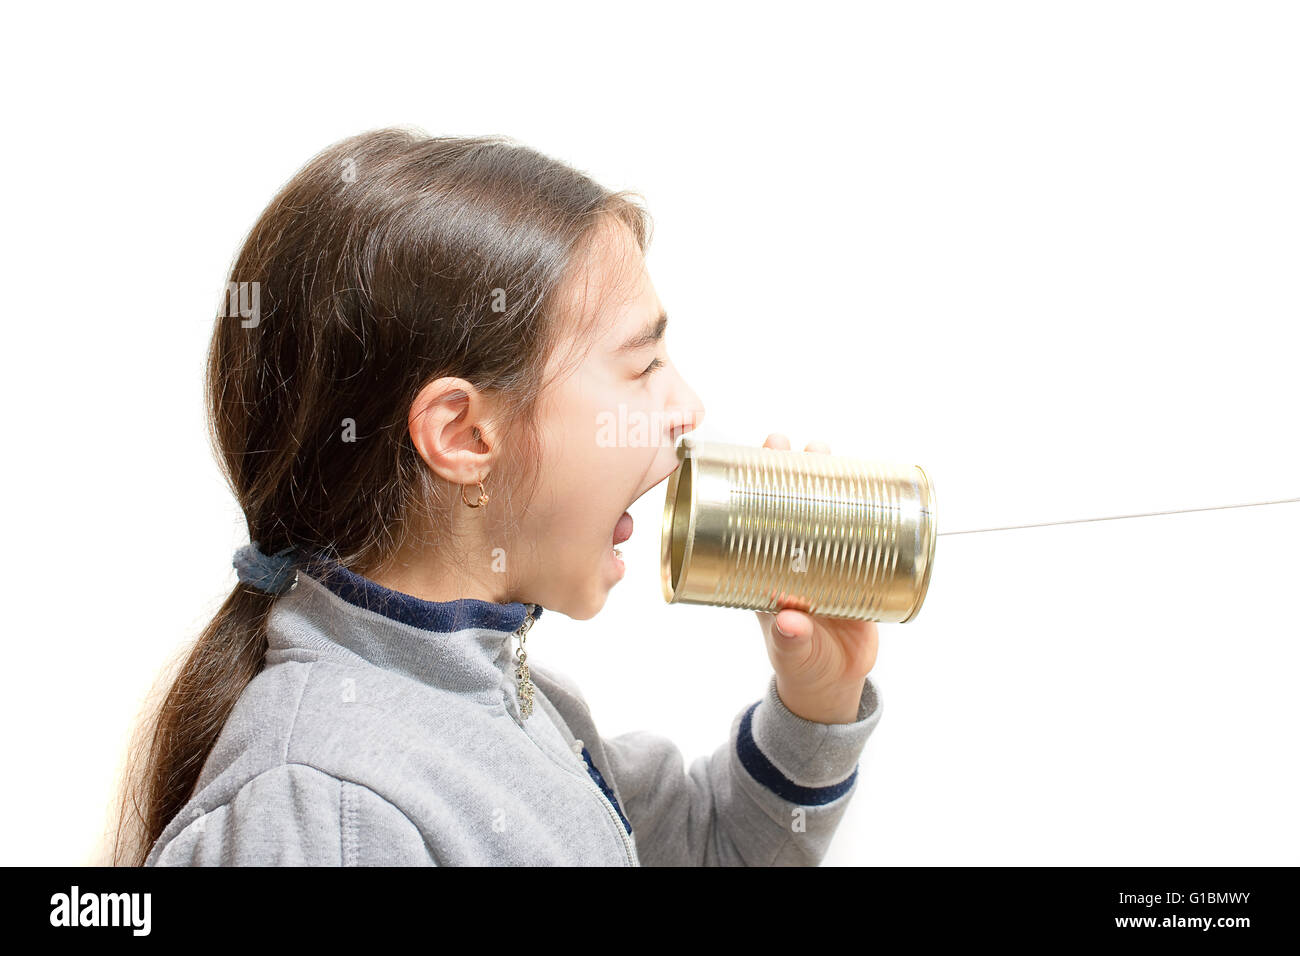 girl screaming in the phone built with the jar Stock Photo